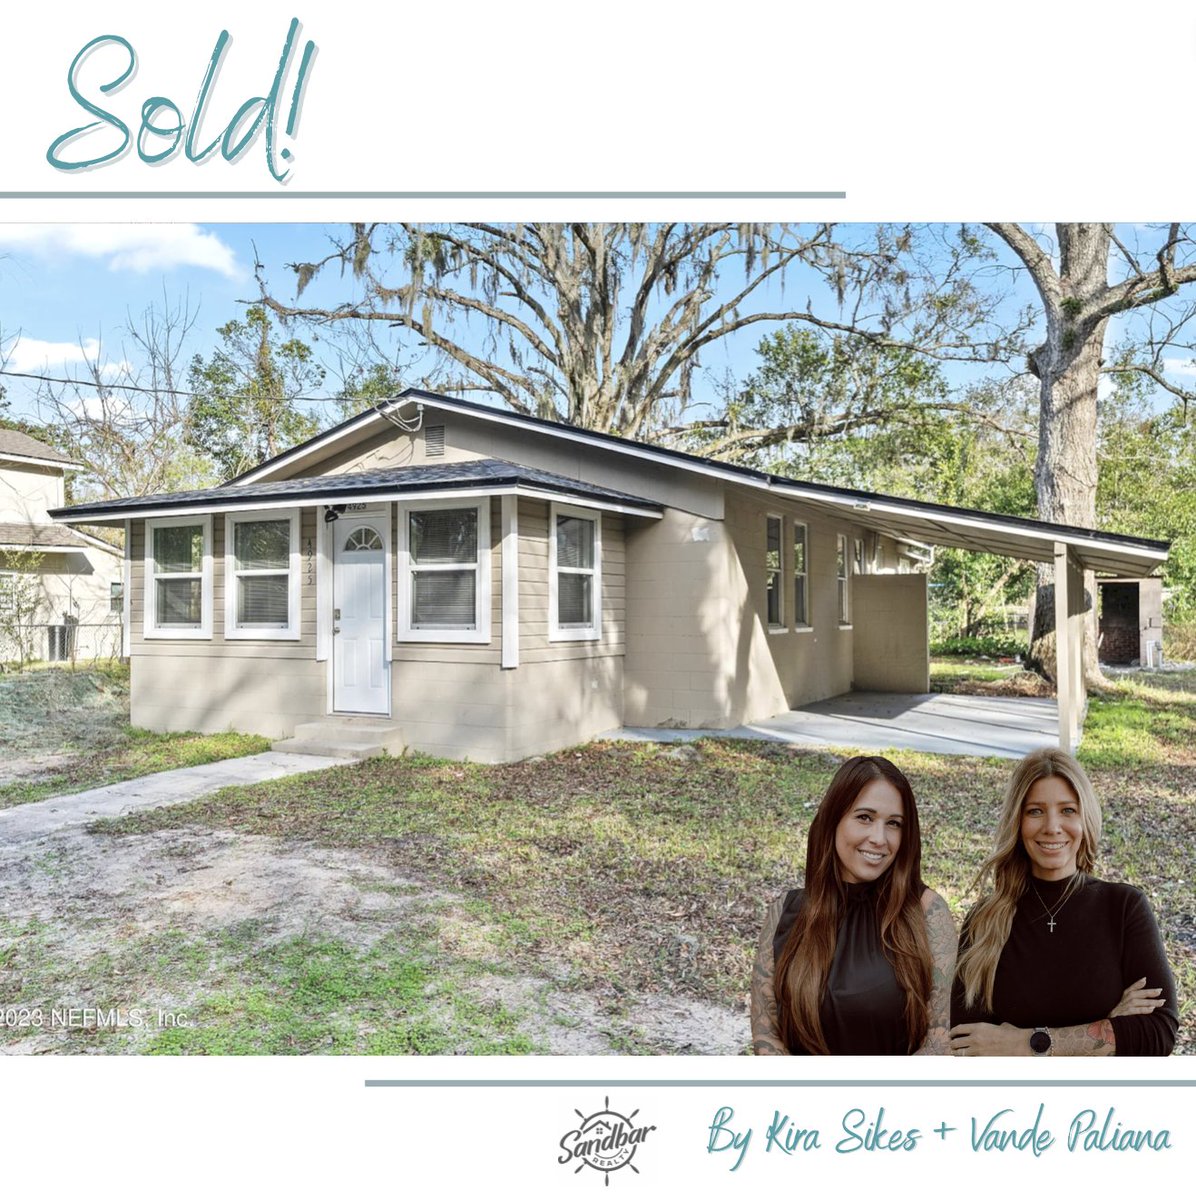 Everything we touch turns to #SOLD!🔑

If you’re ready to #sellyourhome, call or text 904-944-5390 to connect with an agent. #jacksonville #jaxfl #jaxbeach #jacksonvillebeach #florida #floridahome